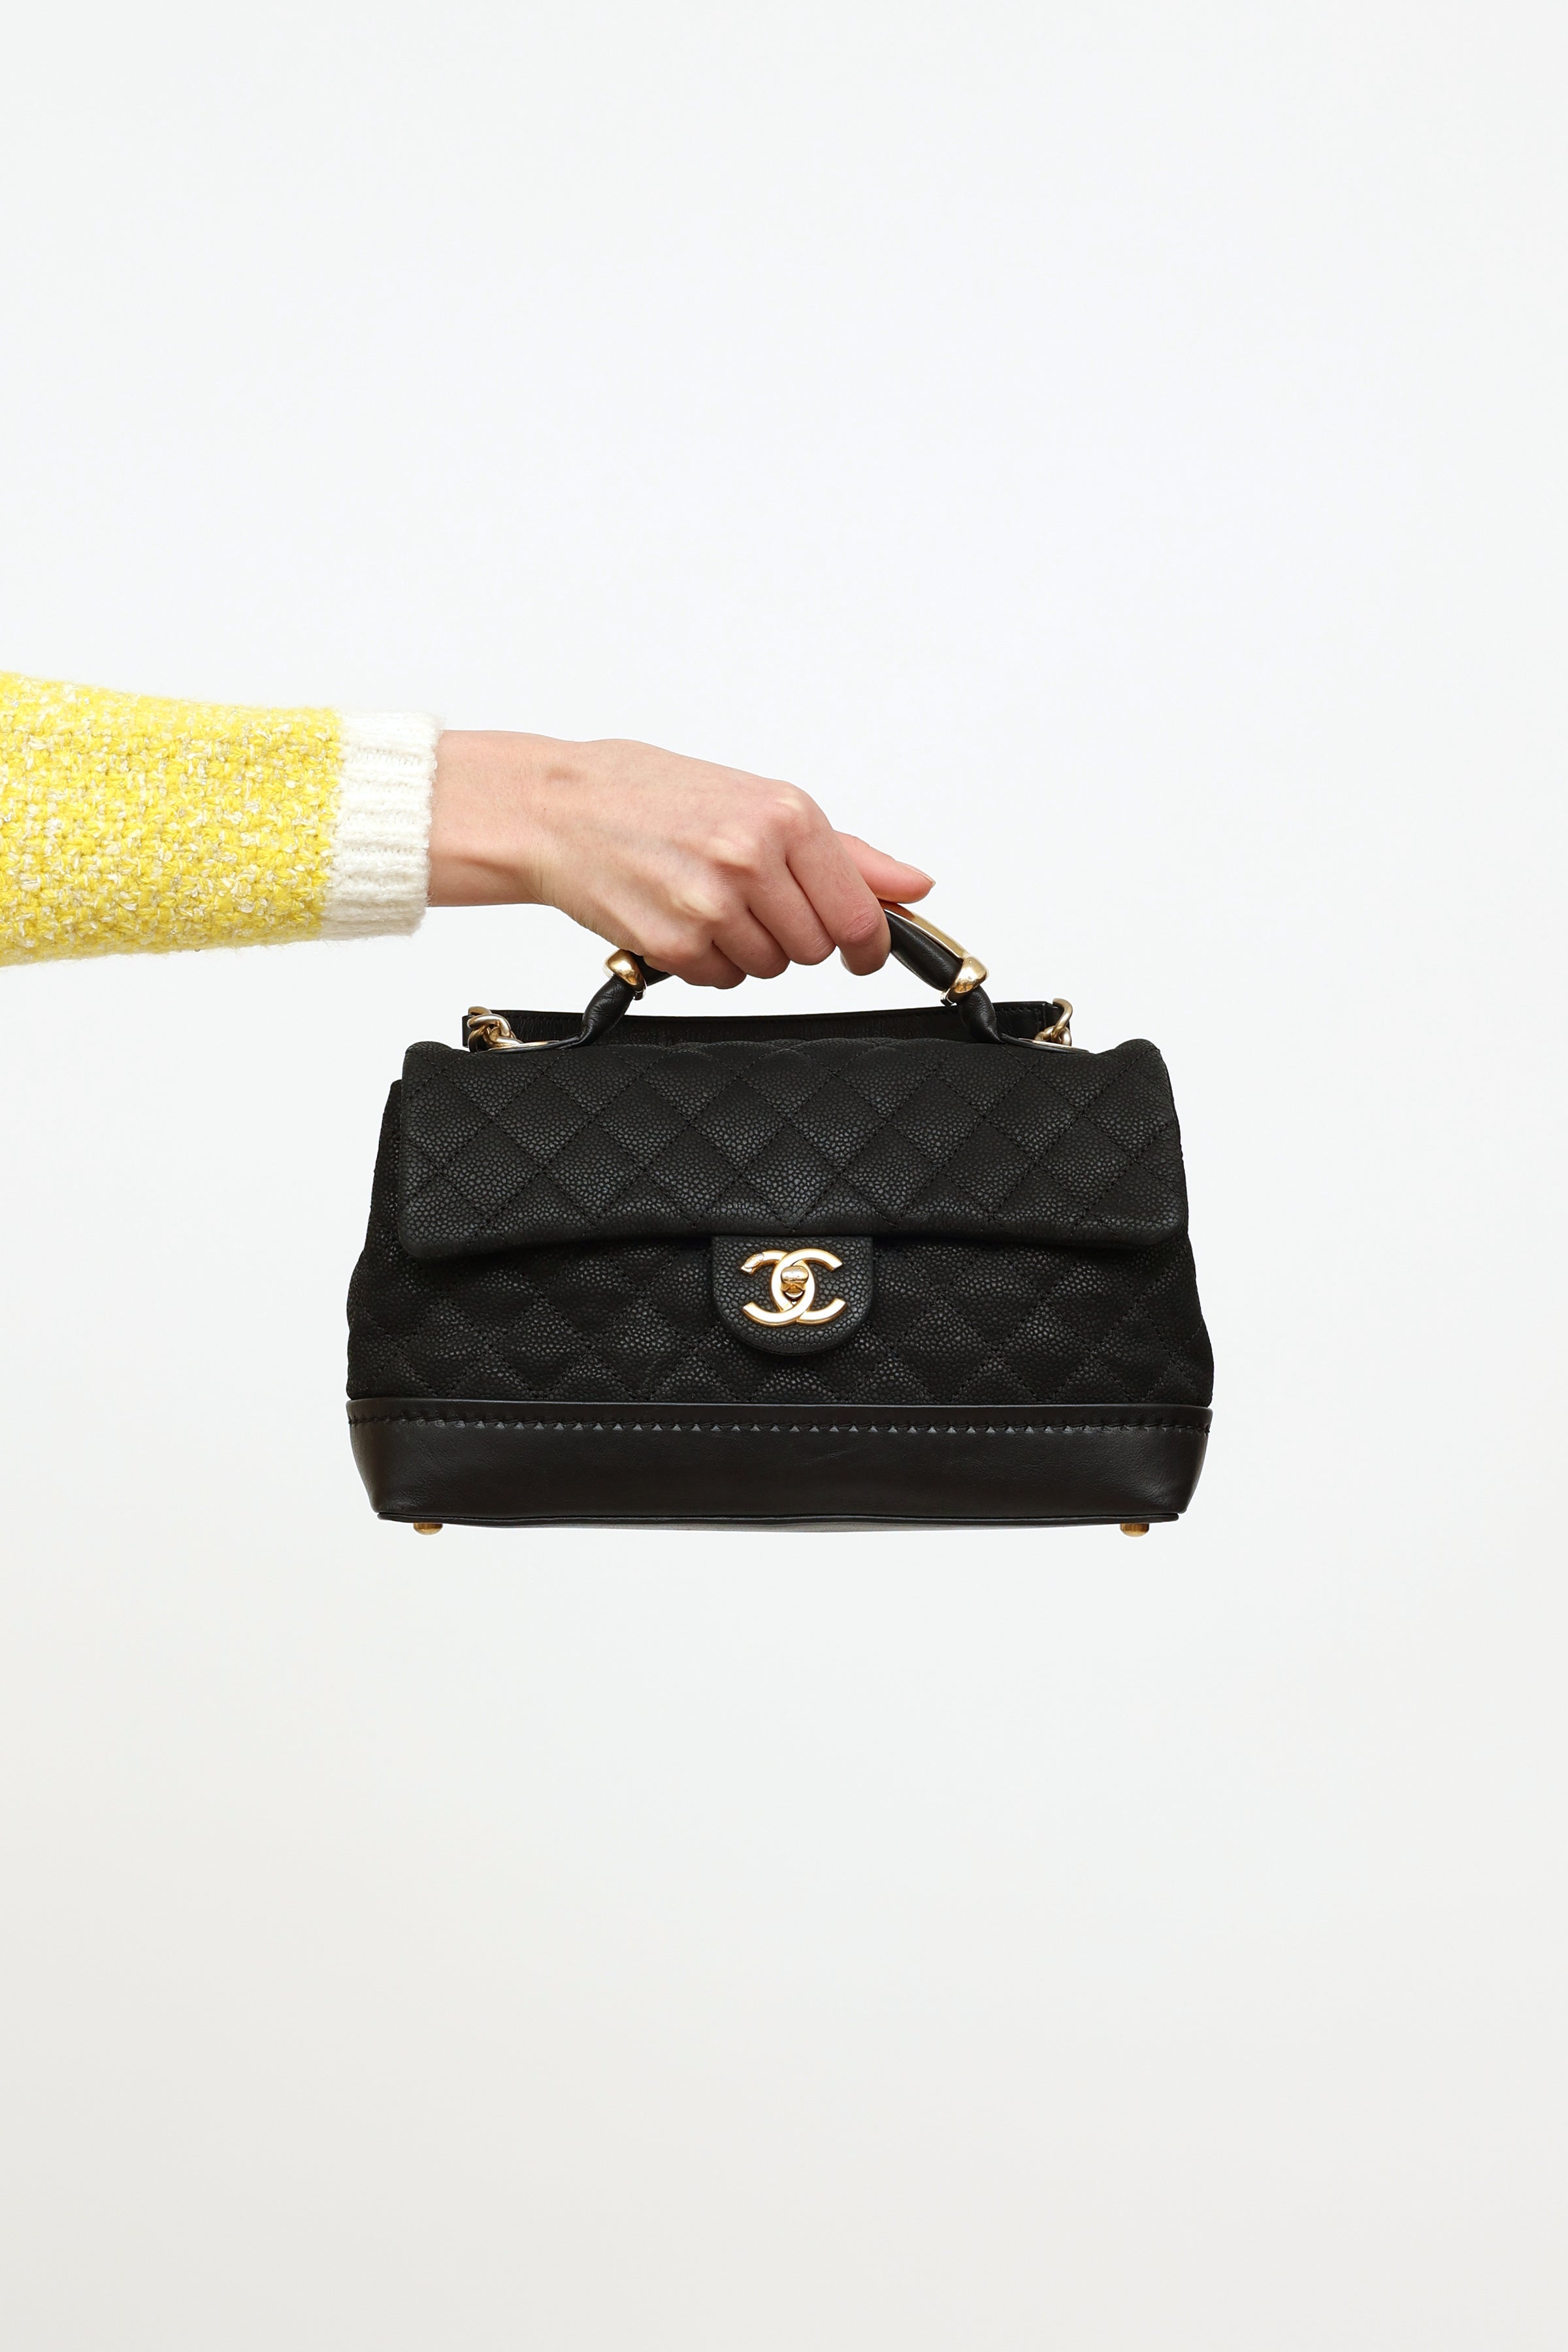 A BLACK QUILTED LEATHER SINGLE FLAP POUCH BAG, CHANEL, 2013